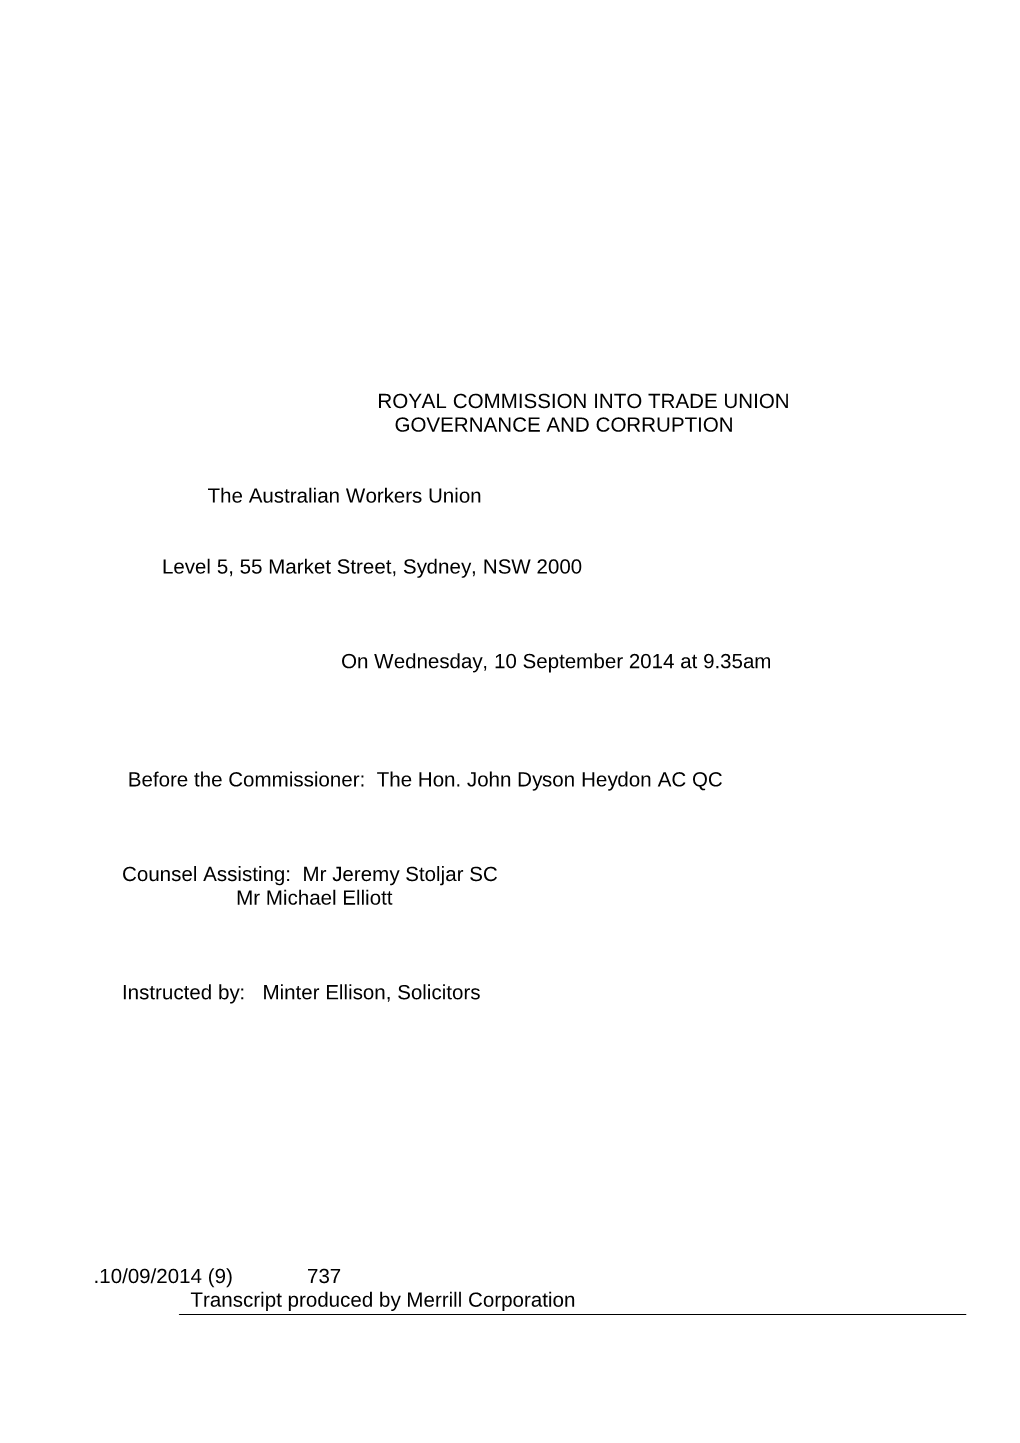 Royal Commission Into Trade Union Governance and Corruption, Transcript, 10 September 2014